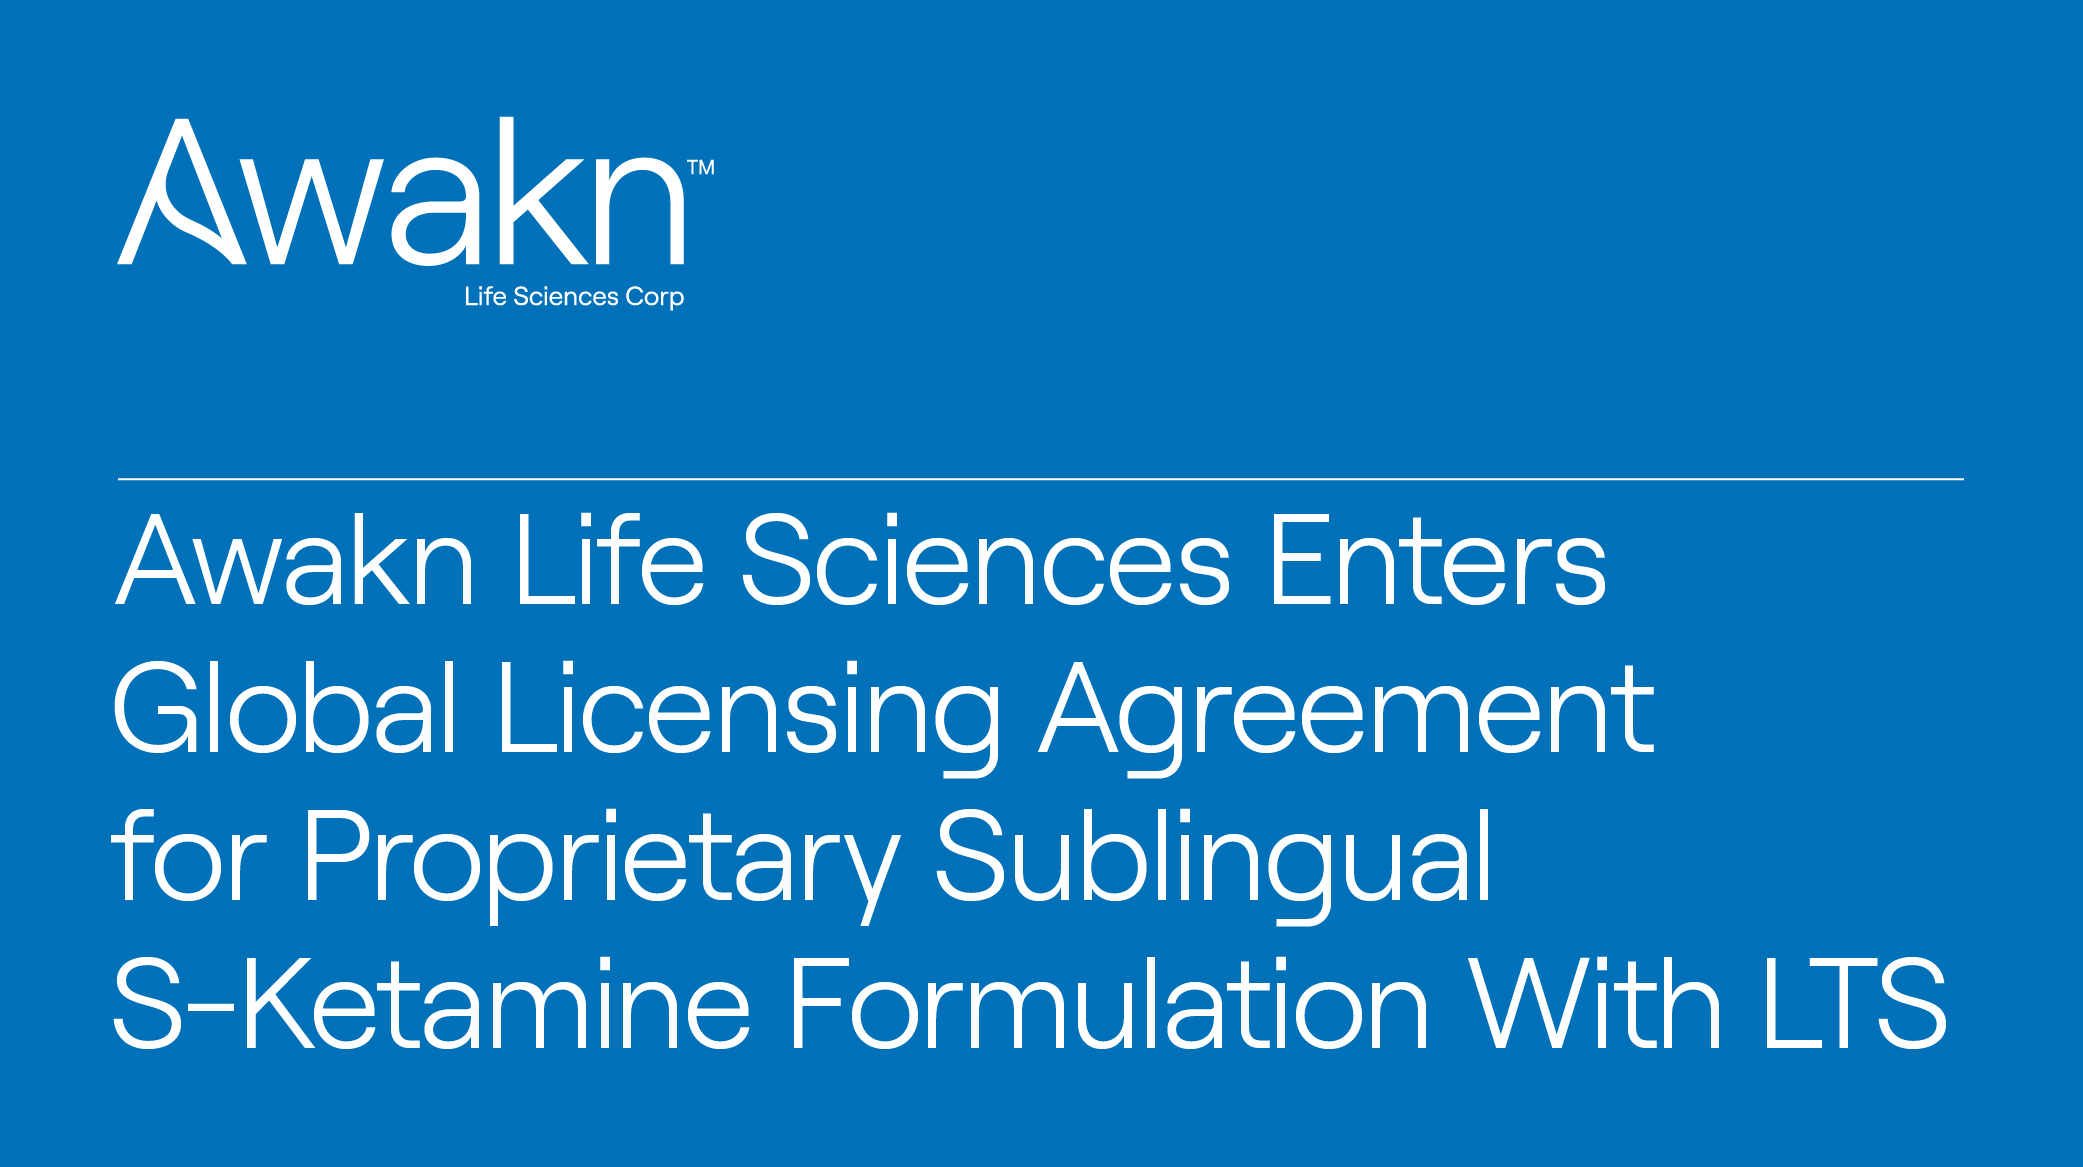 Awakn Life Sciences Enters Global Licensing Agreement for Proprietary Sublingual S-Ketamine Formulation With LTS